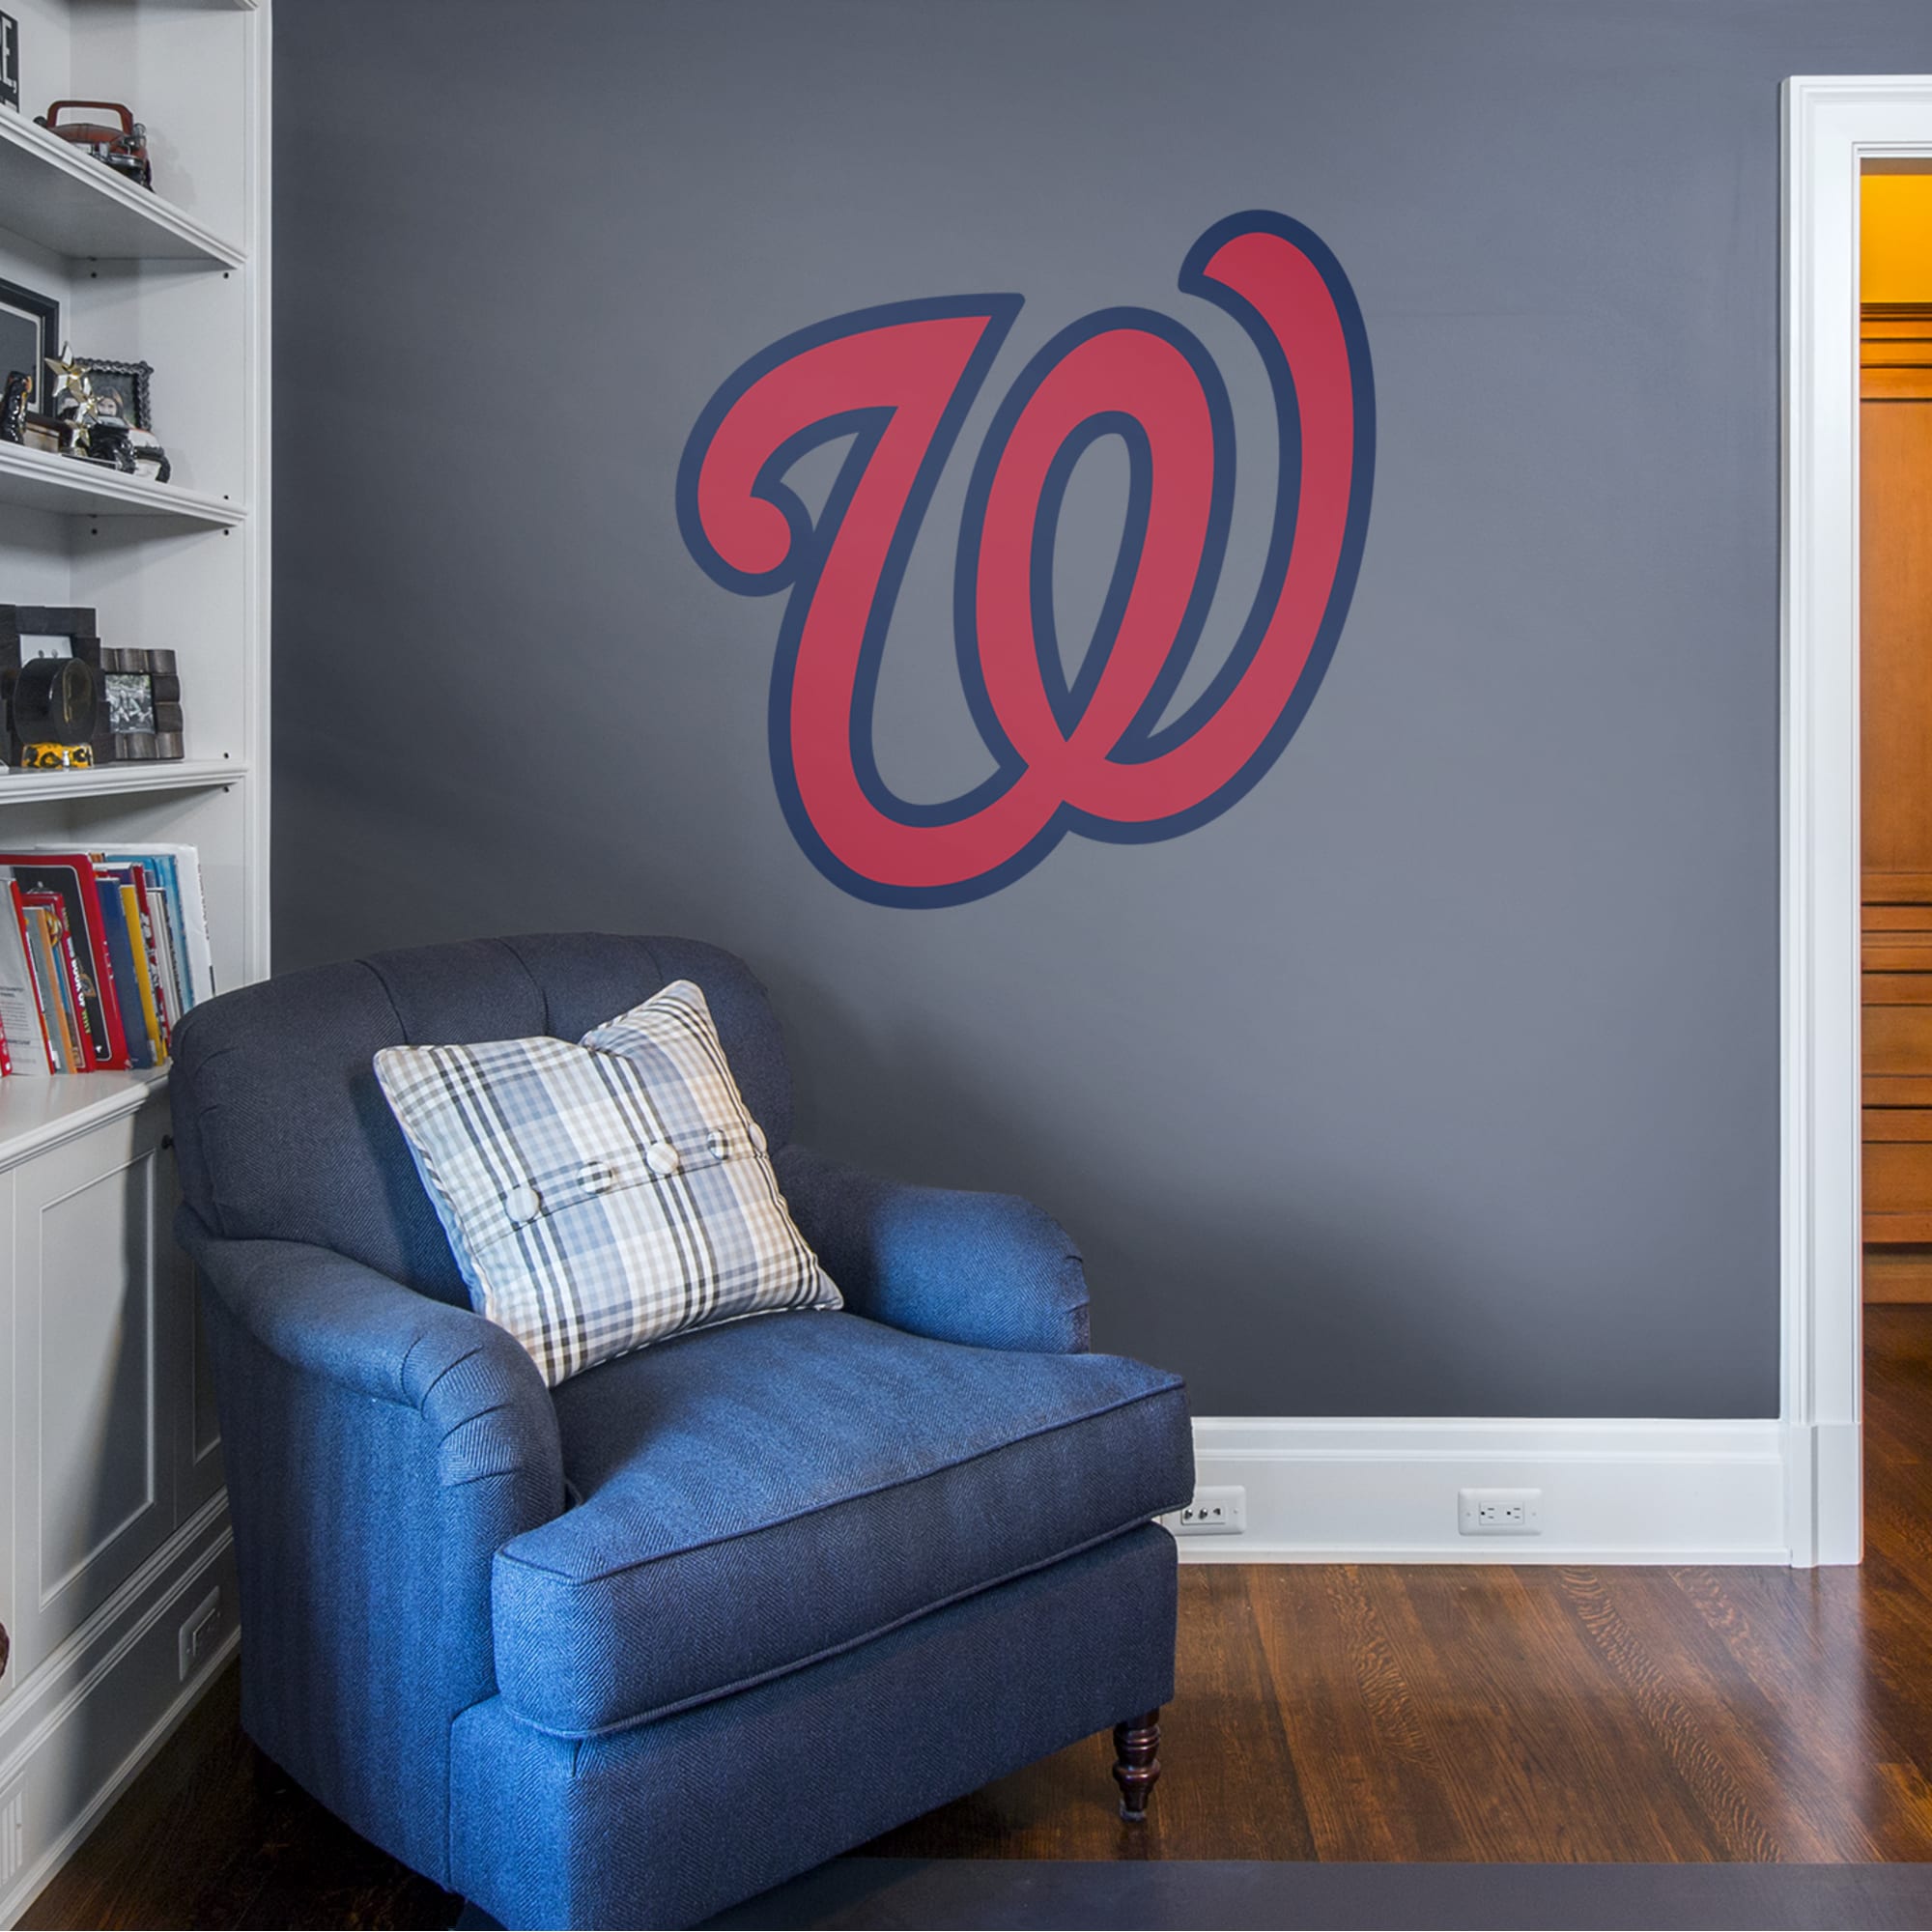 Washington Nationals: "W" Logo - Officially Licensed MLB Removable Wall Decal 45.0"W x 45.0"H by Fathead | Vinyl